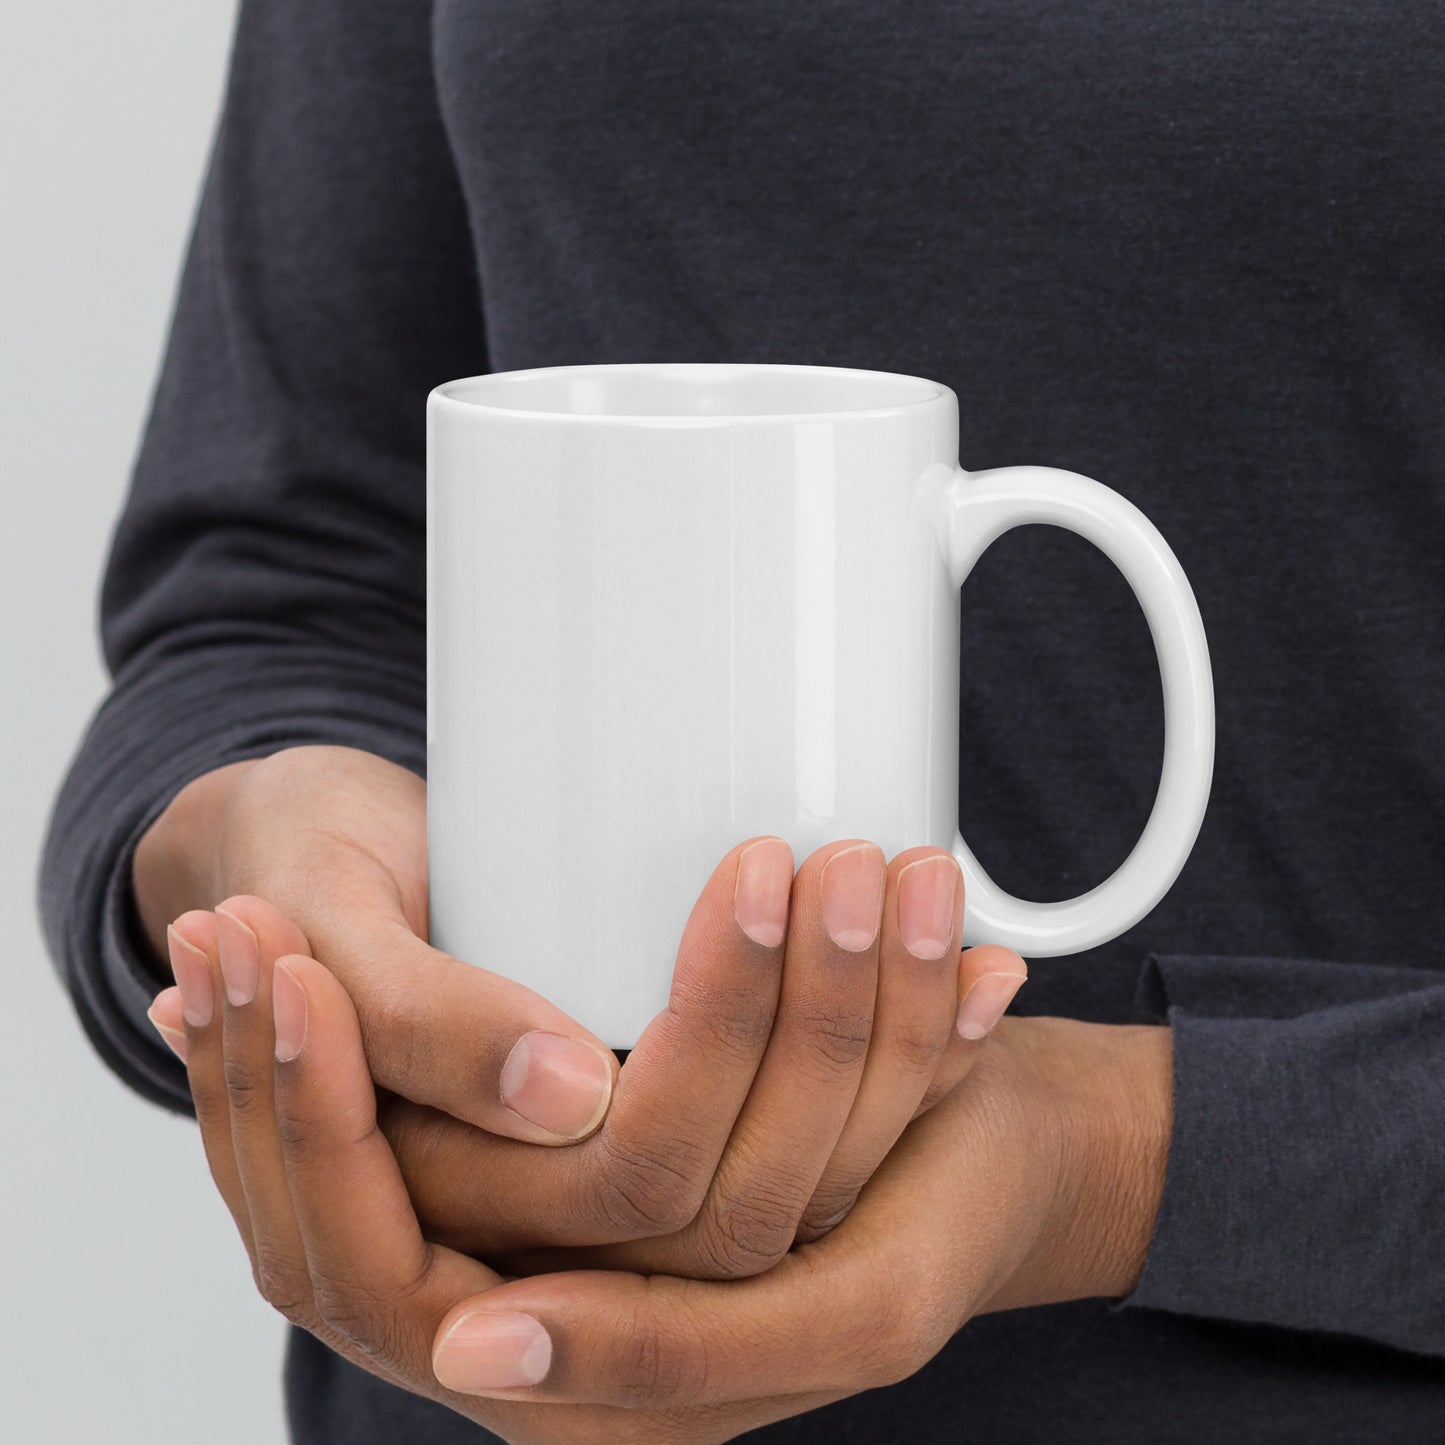 White glossy mug "Coffee in one hand, blunt in another"